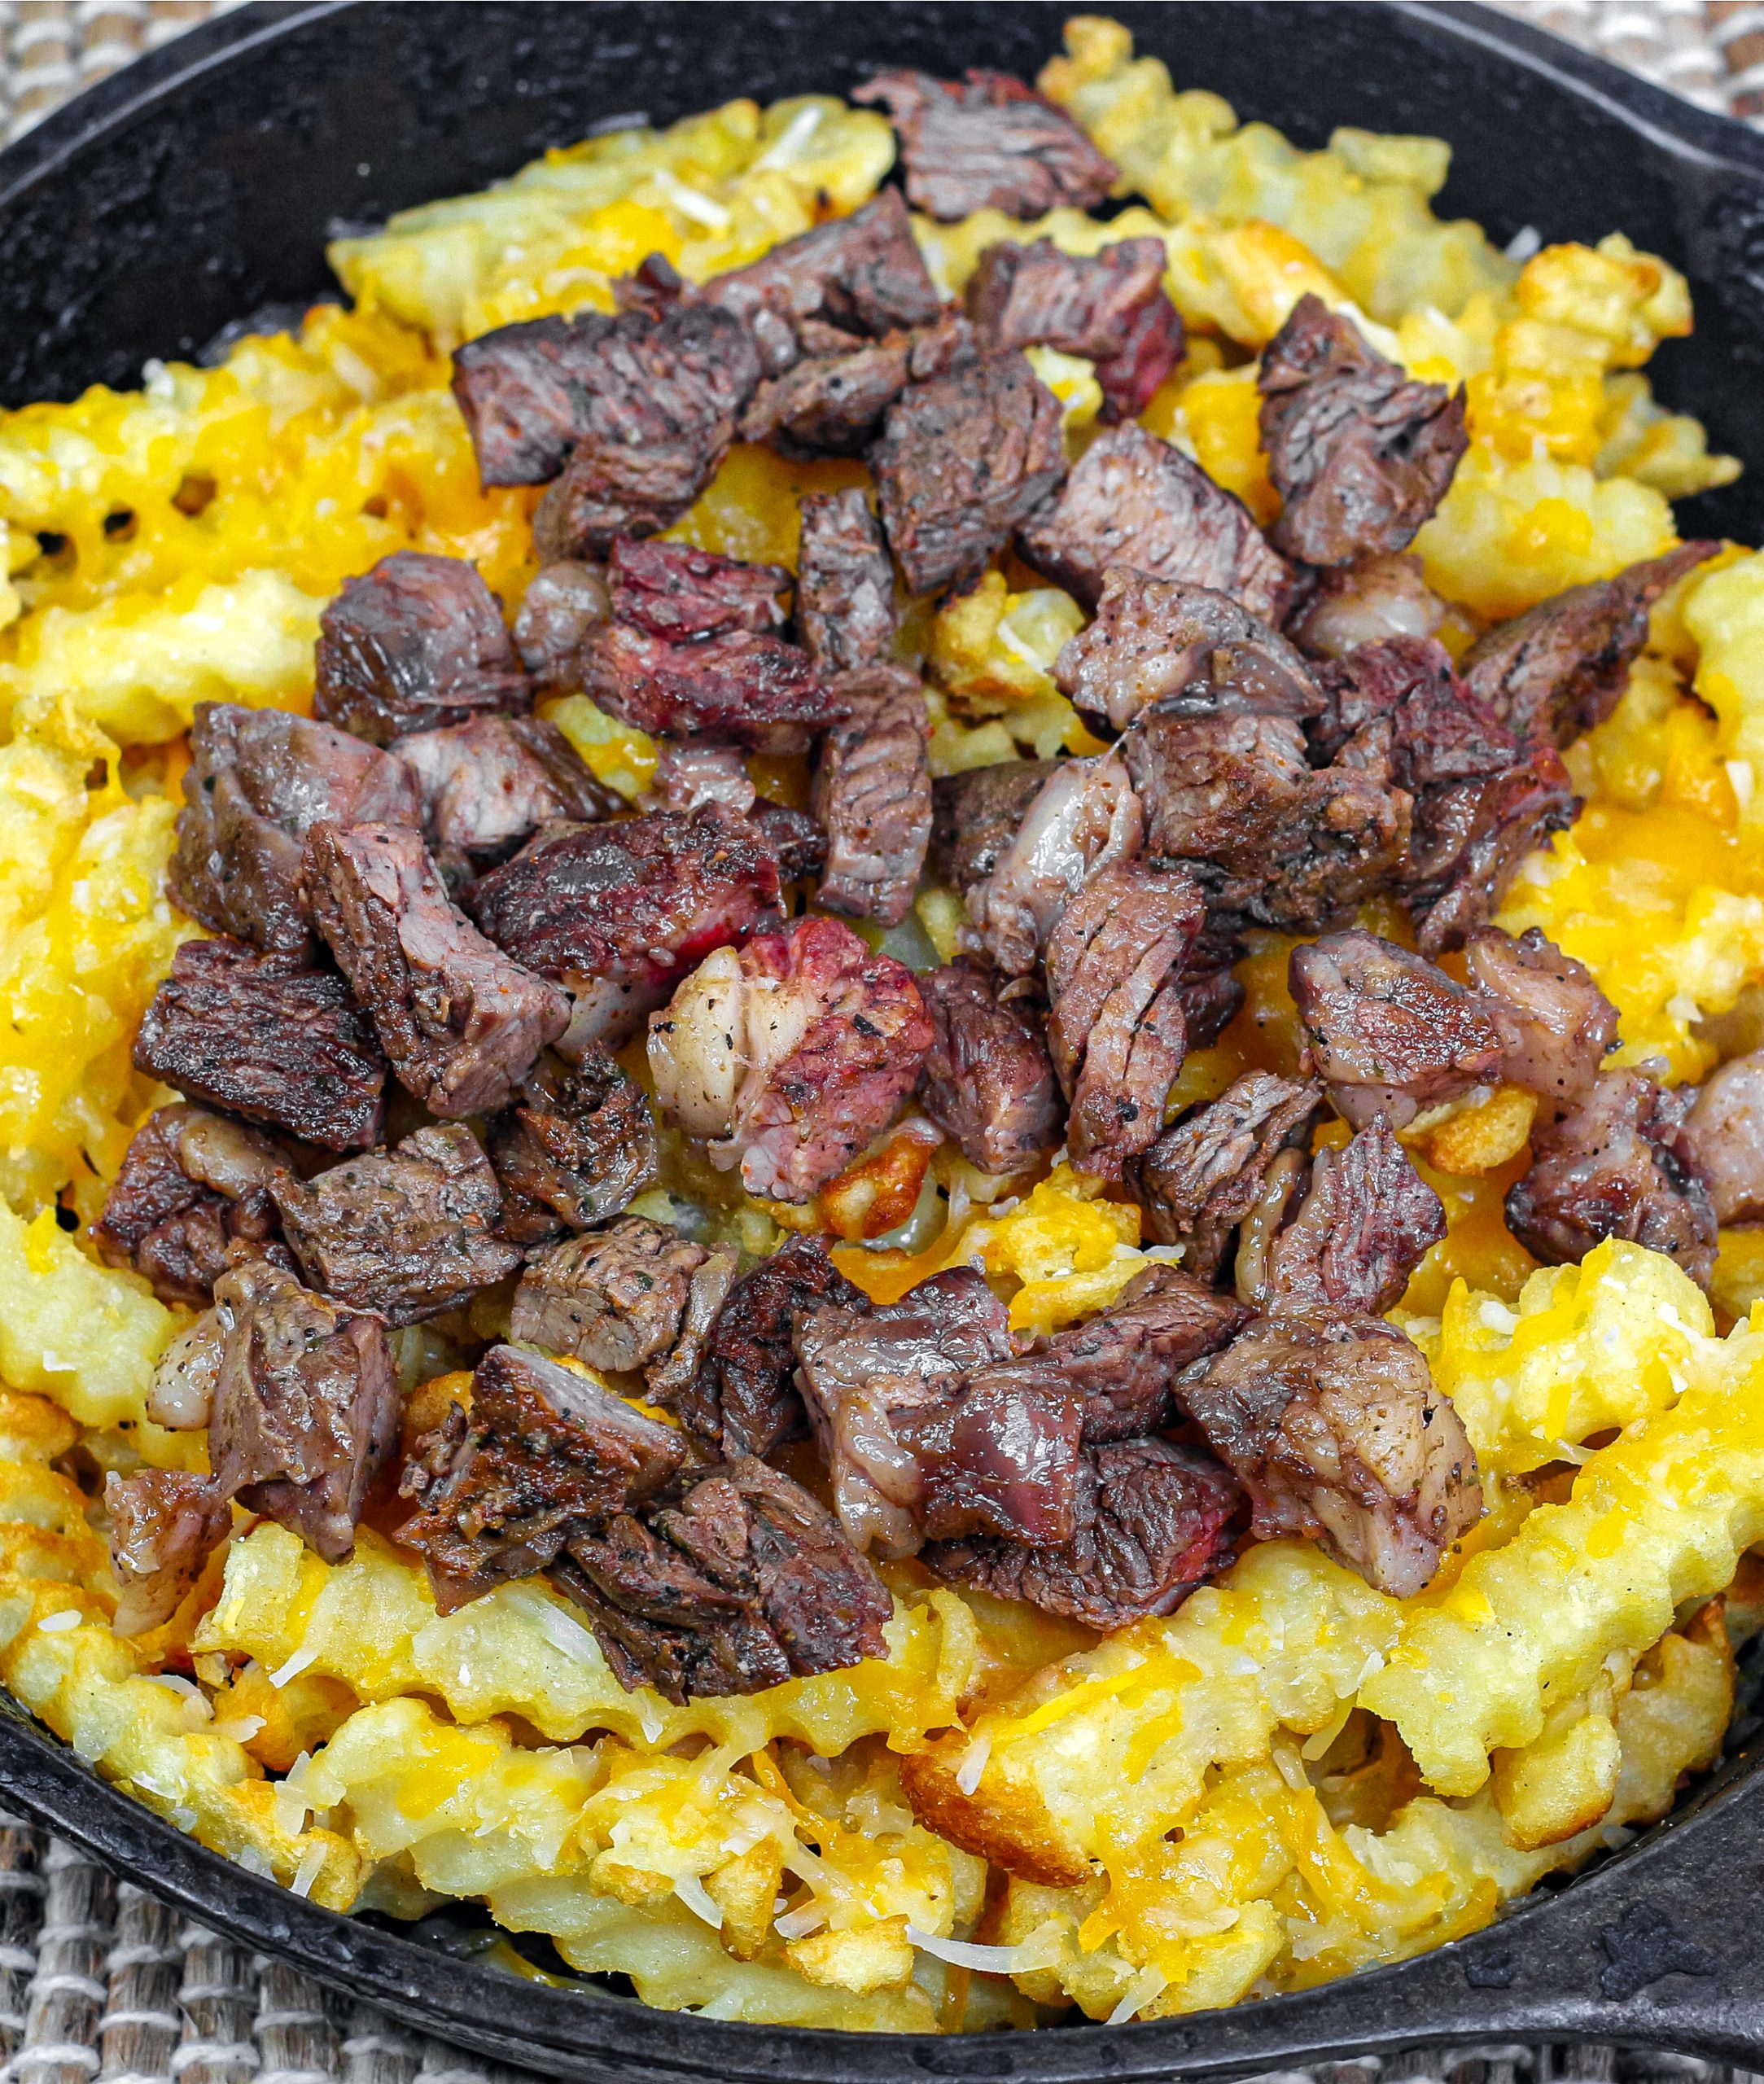 Using a castiron skillet, place the baked french fries, Mexican shredded cheese, and diced carne asada, then broil until the cheese is melted.